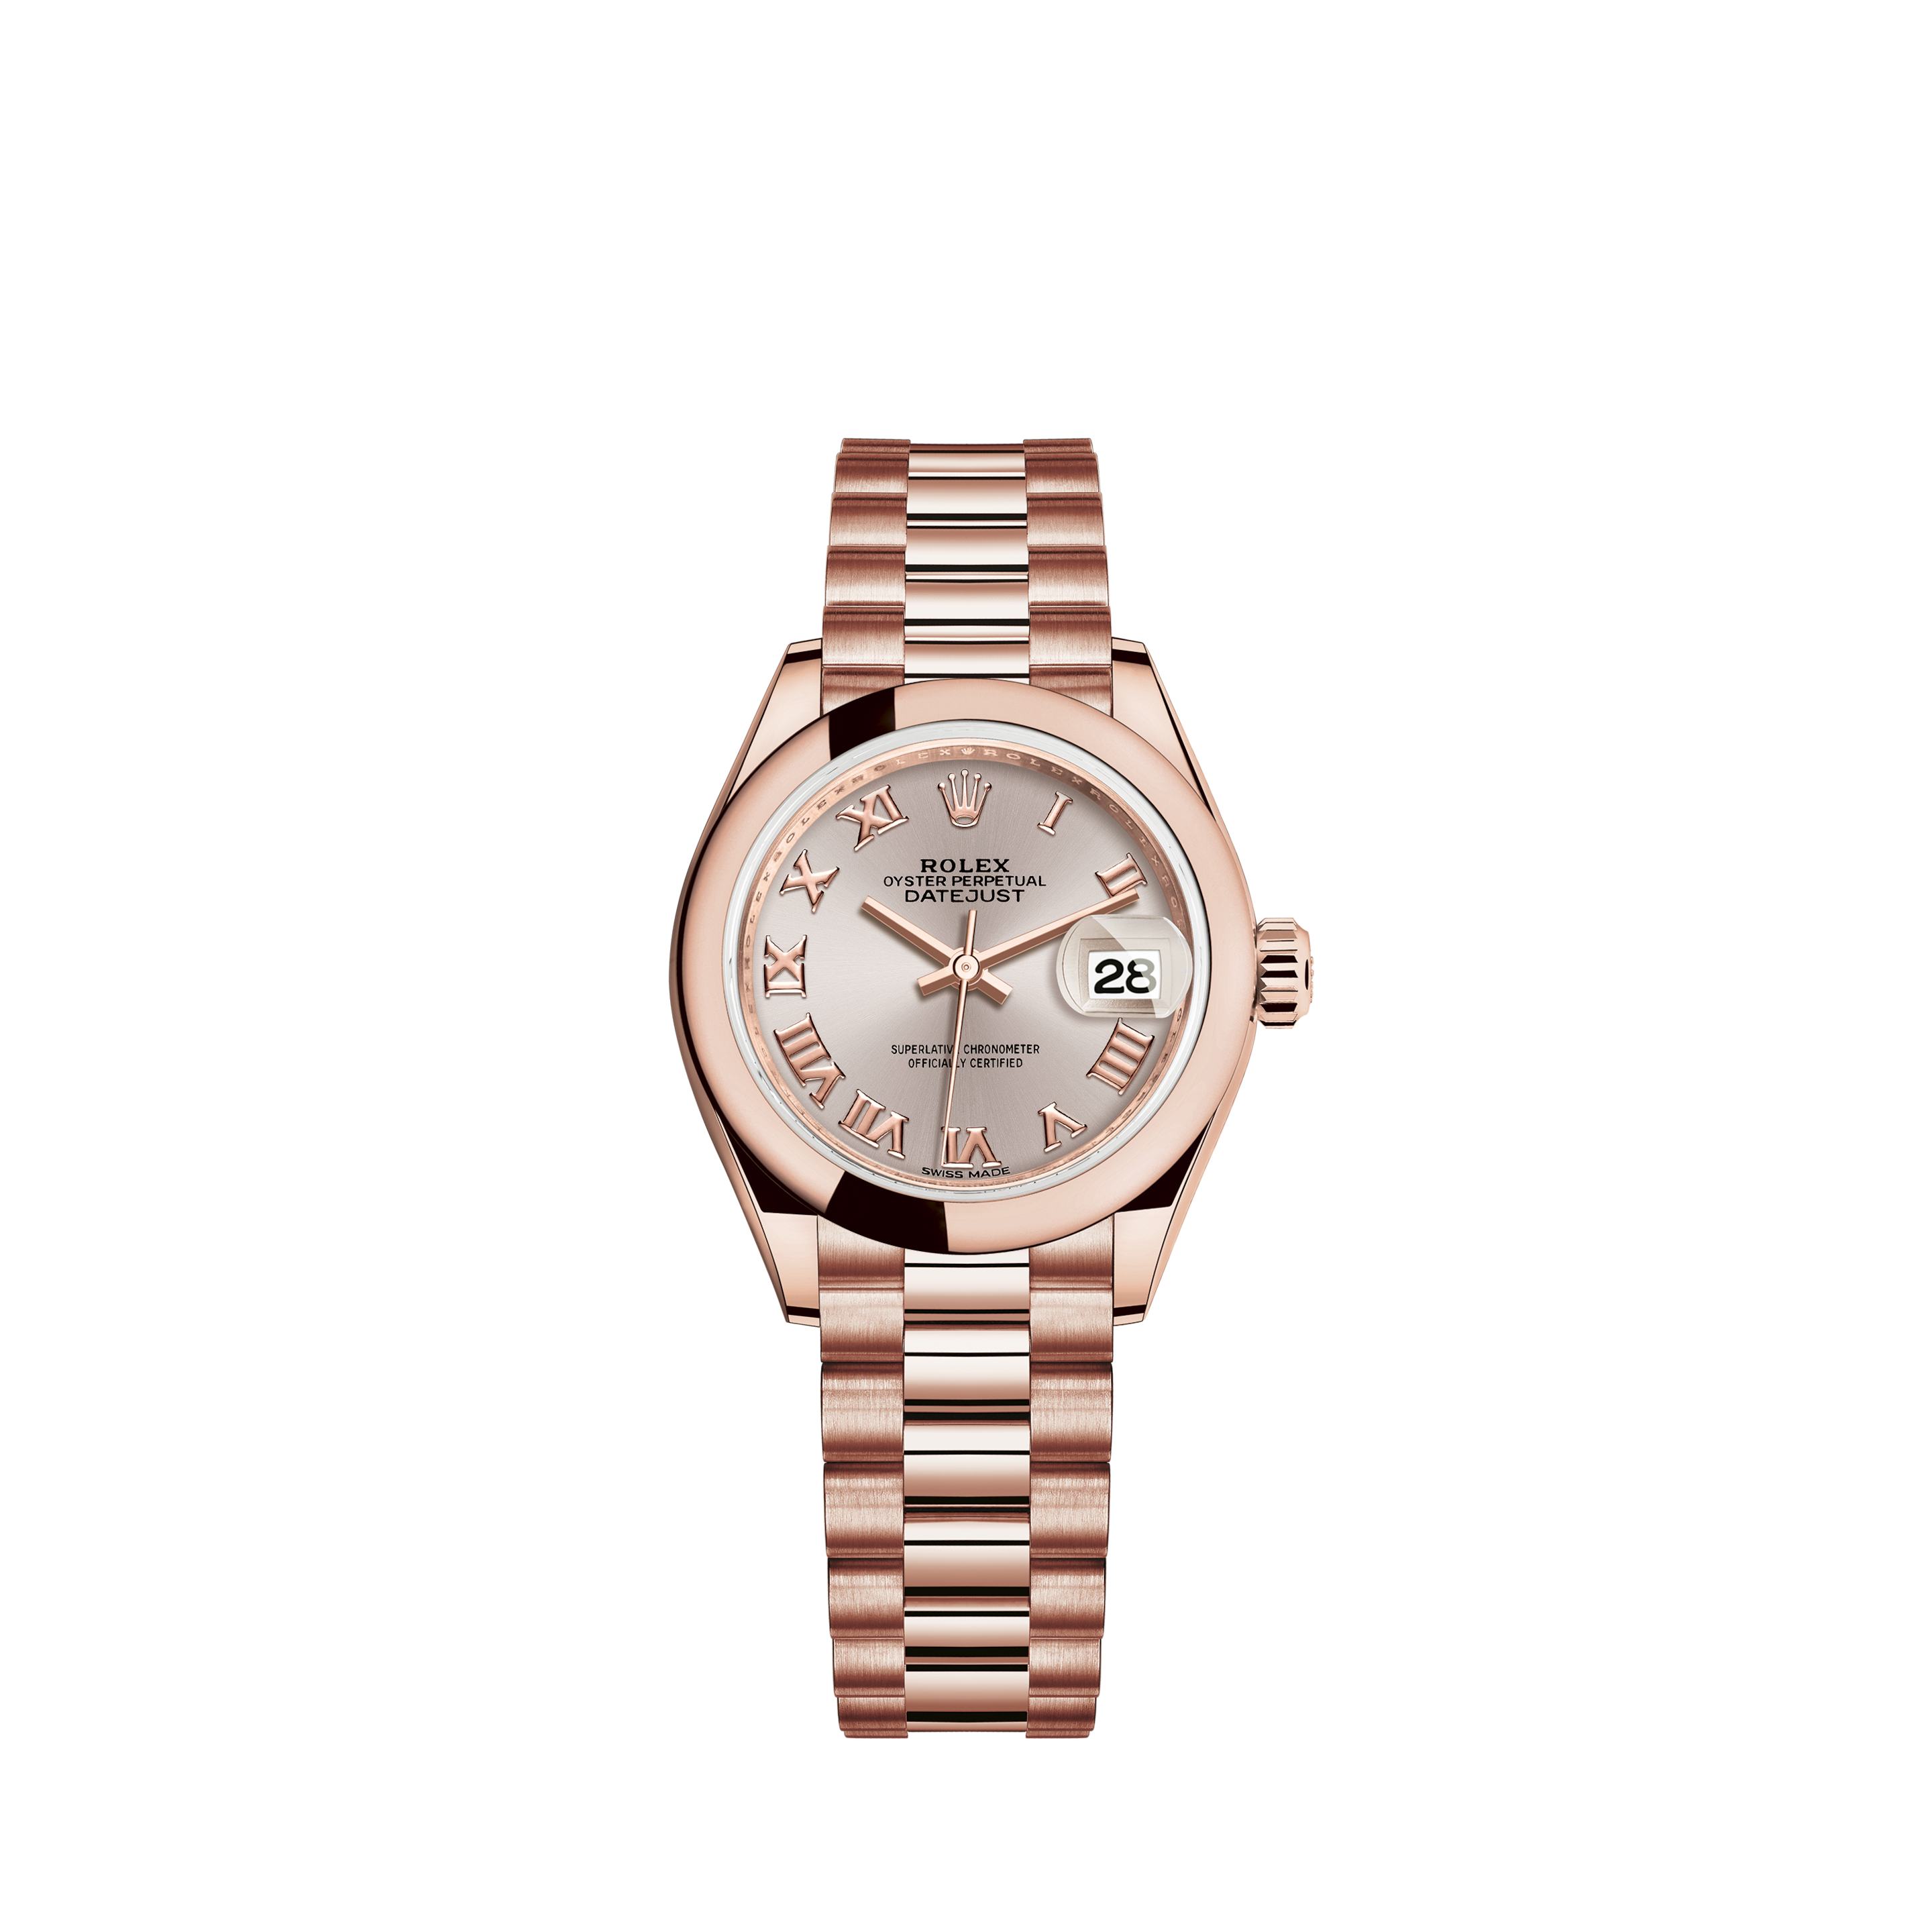 Rolex Ladies Rolex 26mm Datejust Pink MOP Mother Of Pearl Dial with Diamond AccentRolex Ladies Rolex 26mm Datejust Pink String Diamond Dial with Vintage Style Marke